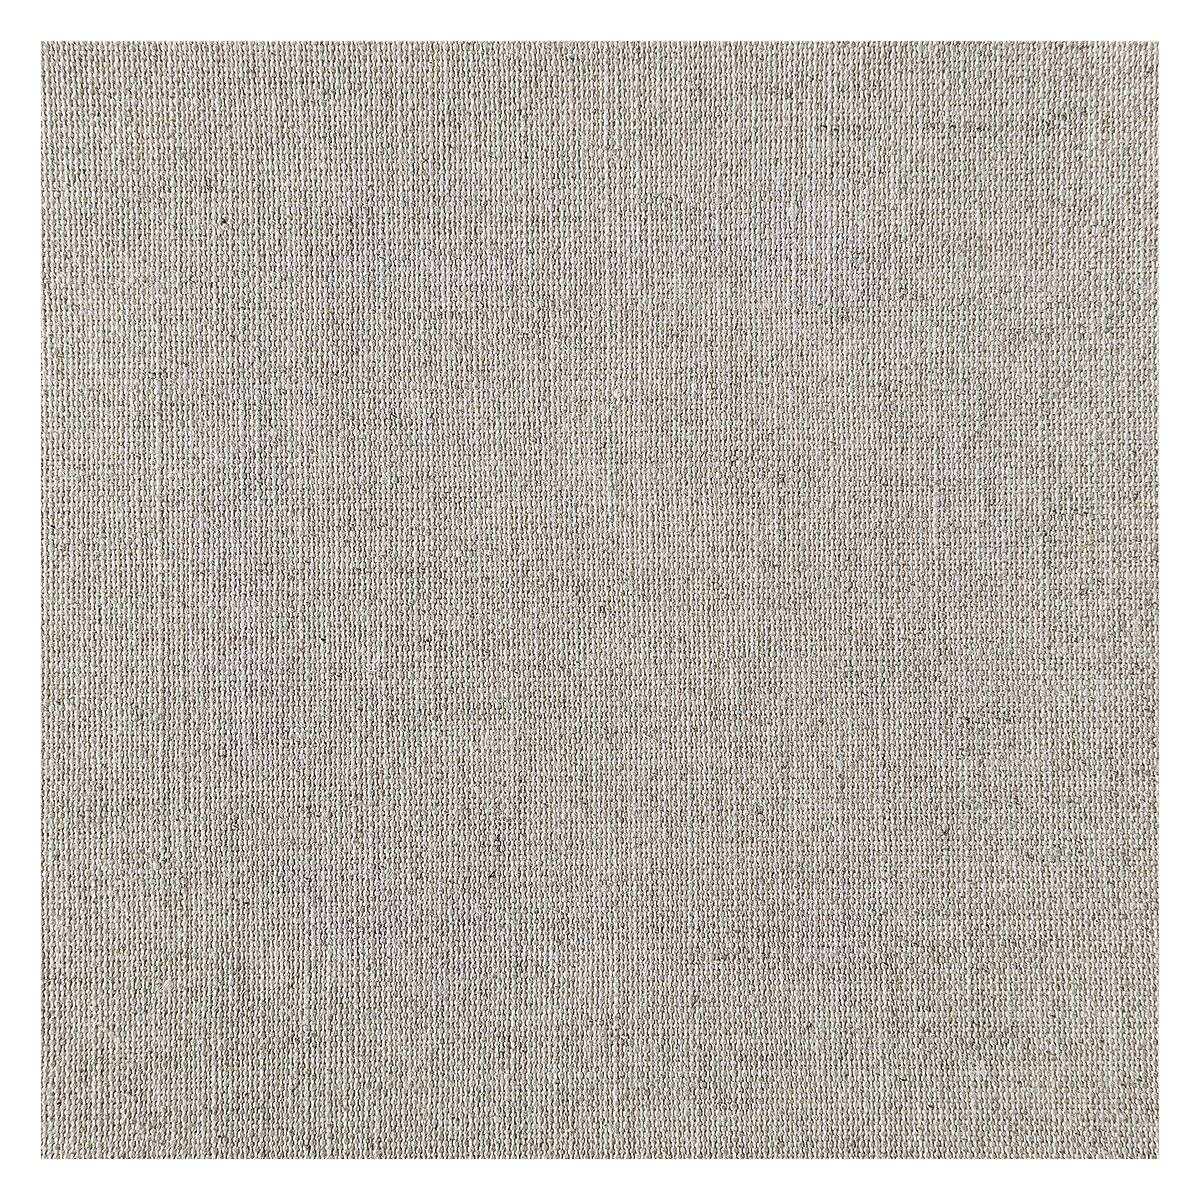 L Linen, 5.9 oz (200 gsm), extra-fine, tightly woven texture, smooth surface